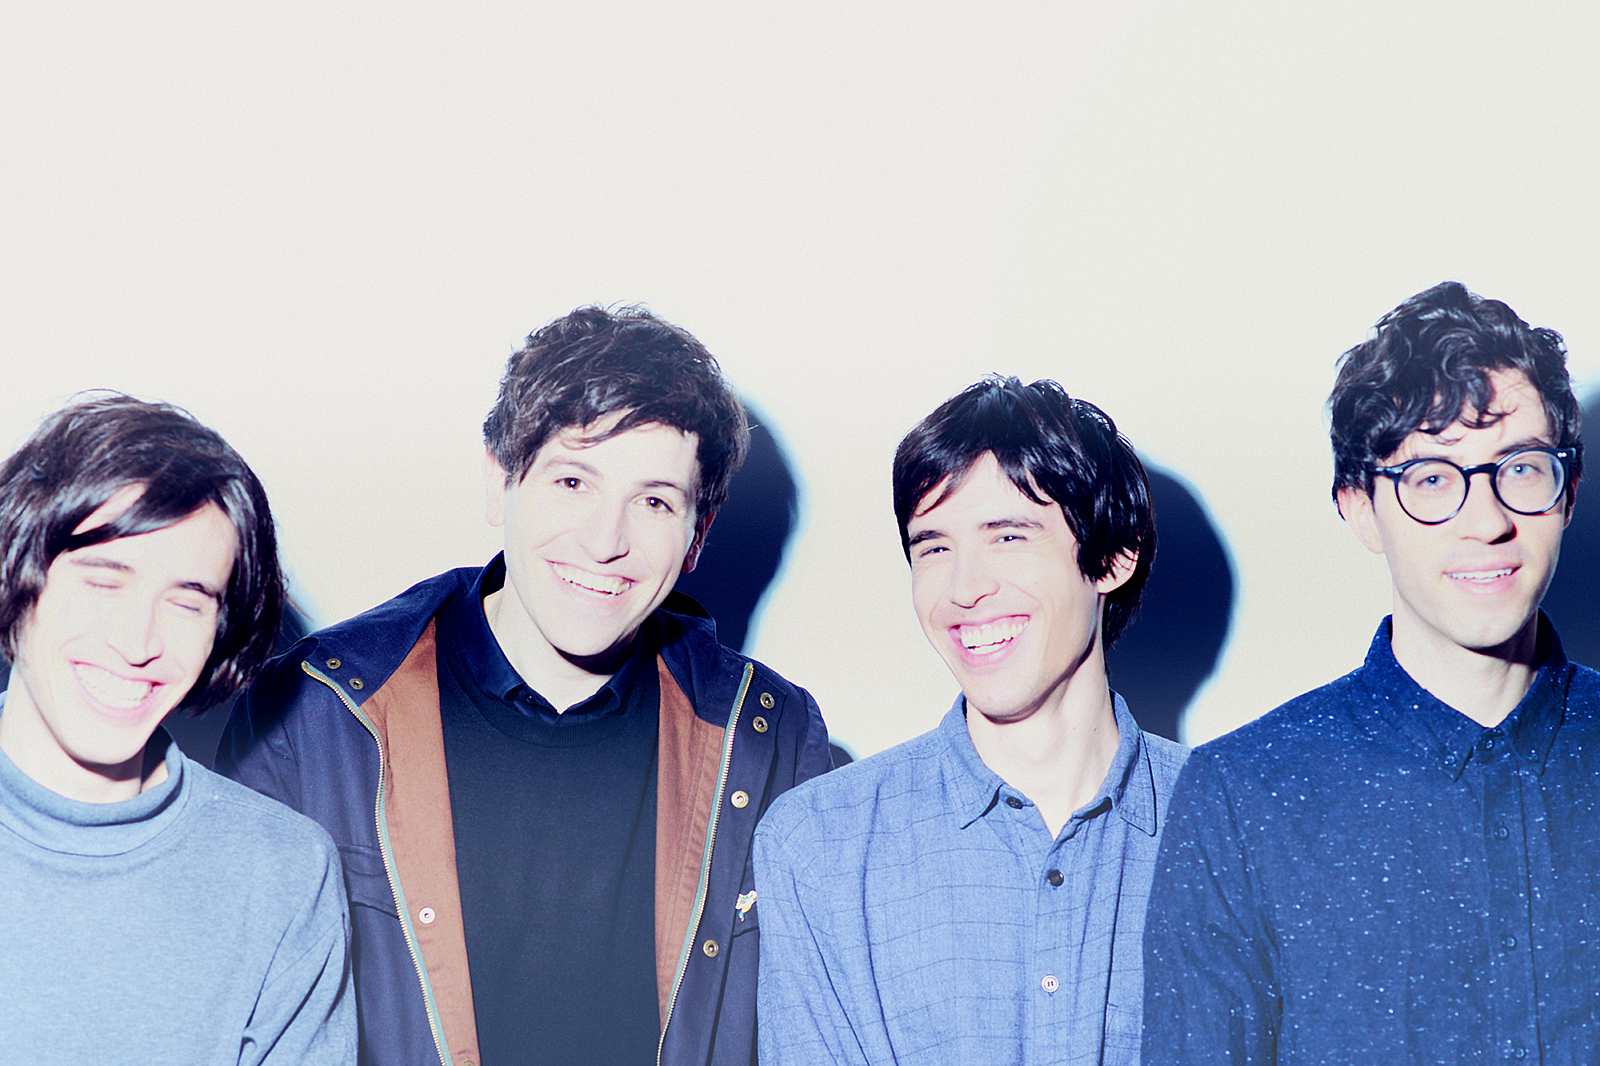 The Pains Of Being Pure At Heart: "We just want to write pop songs!"